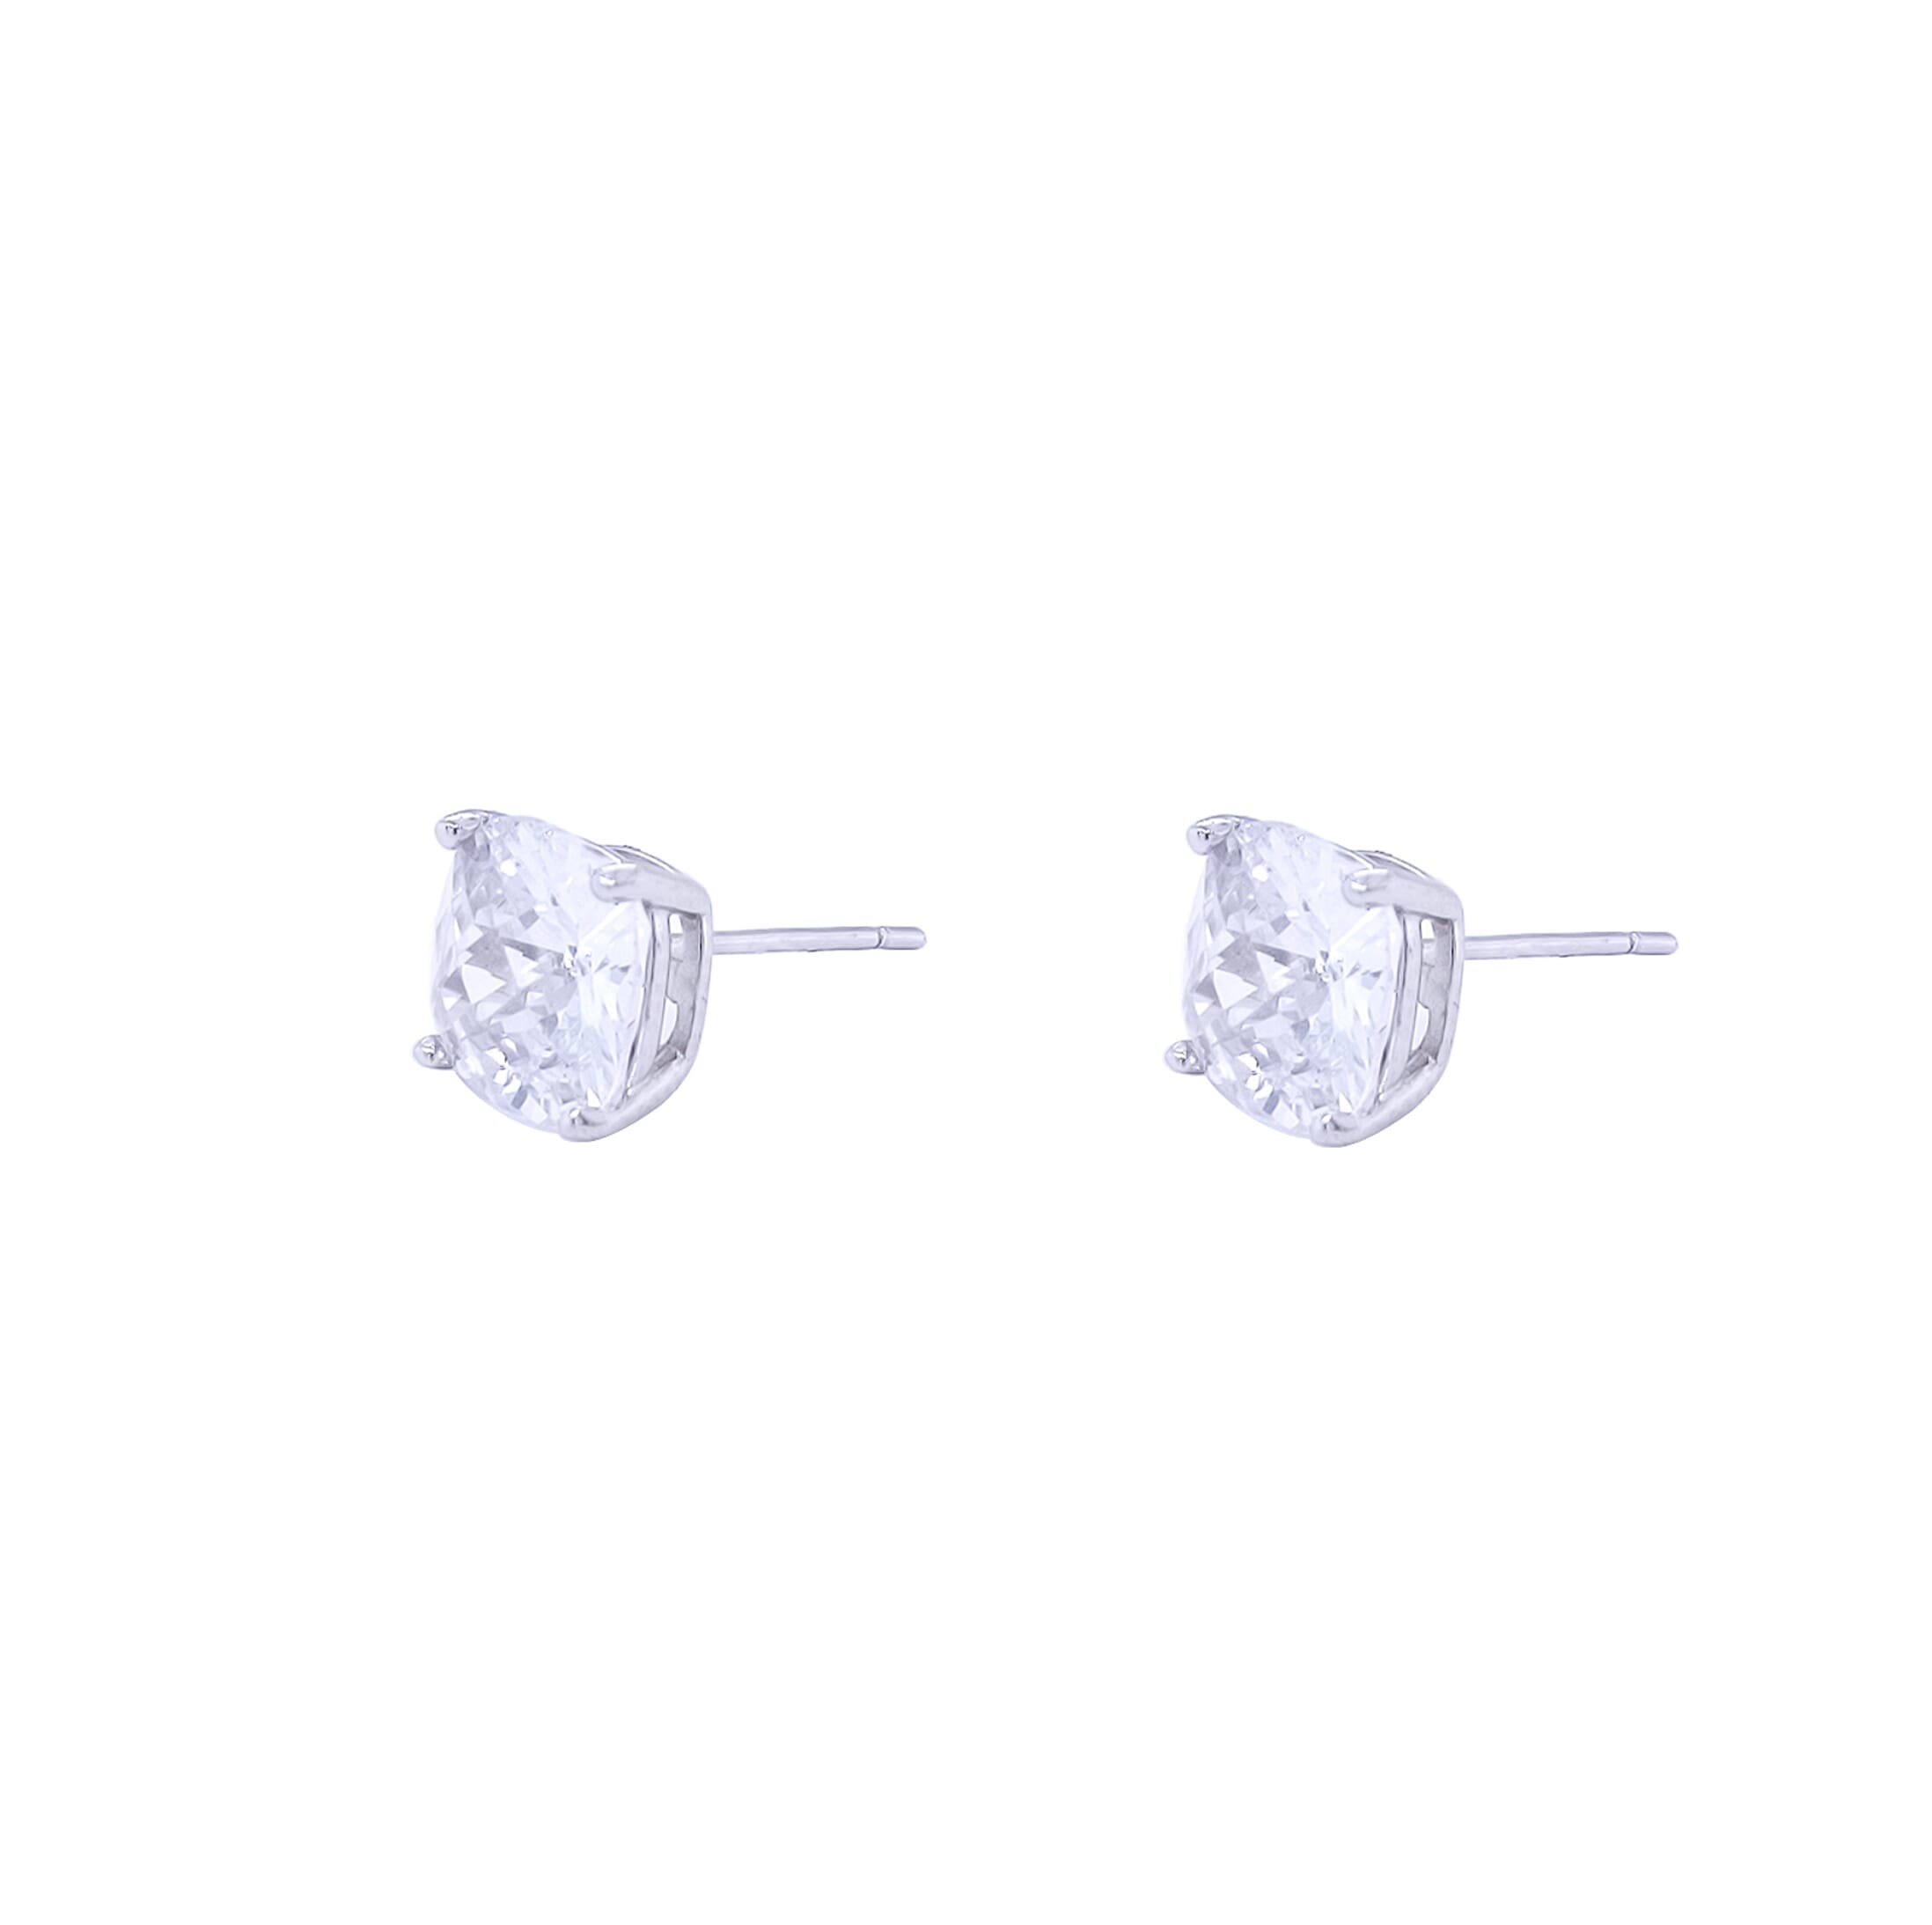 Asfour Stud Earring Made Of Sterling Silver 925 In A Square Shape And With A Clear Zircon Stone